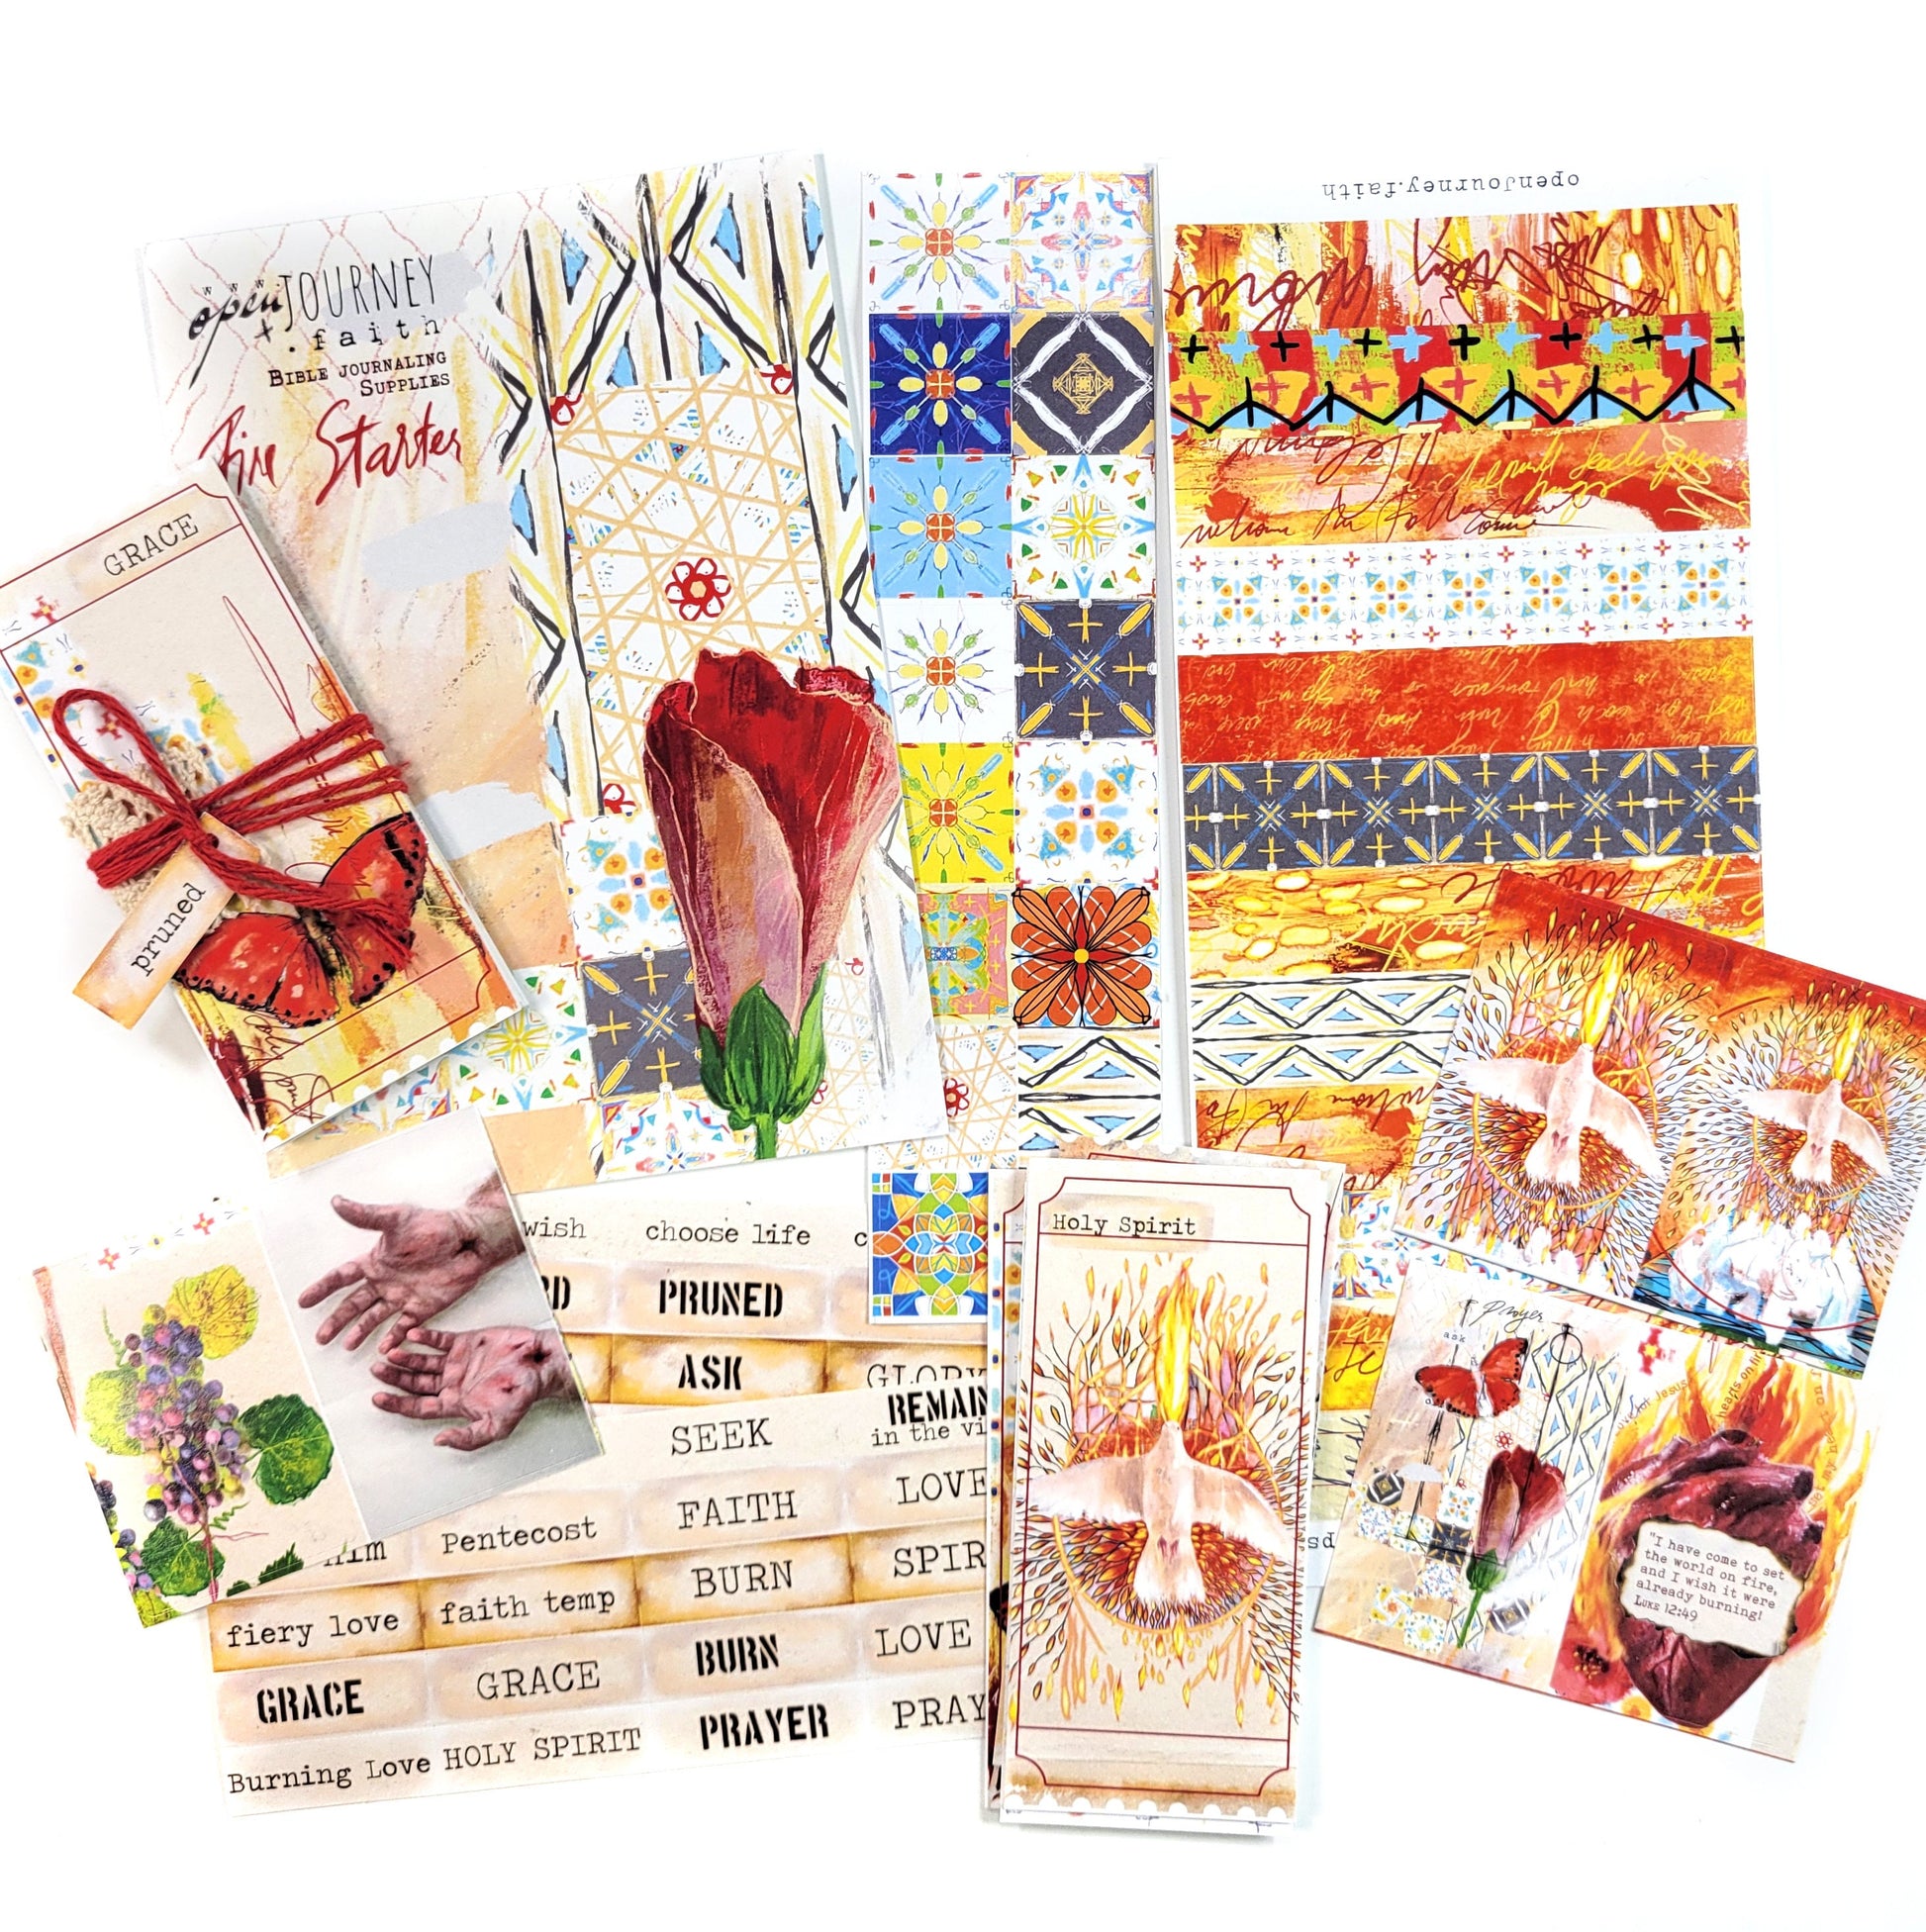 Fire Starter- ADD ON journaling tickets, washi and stickers